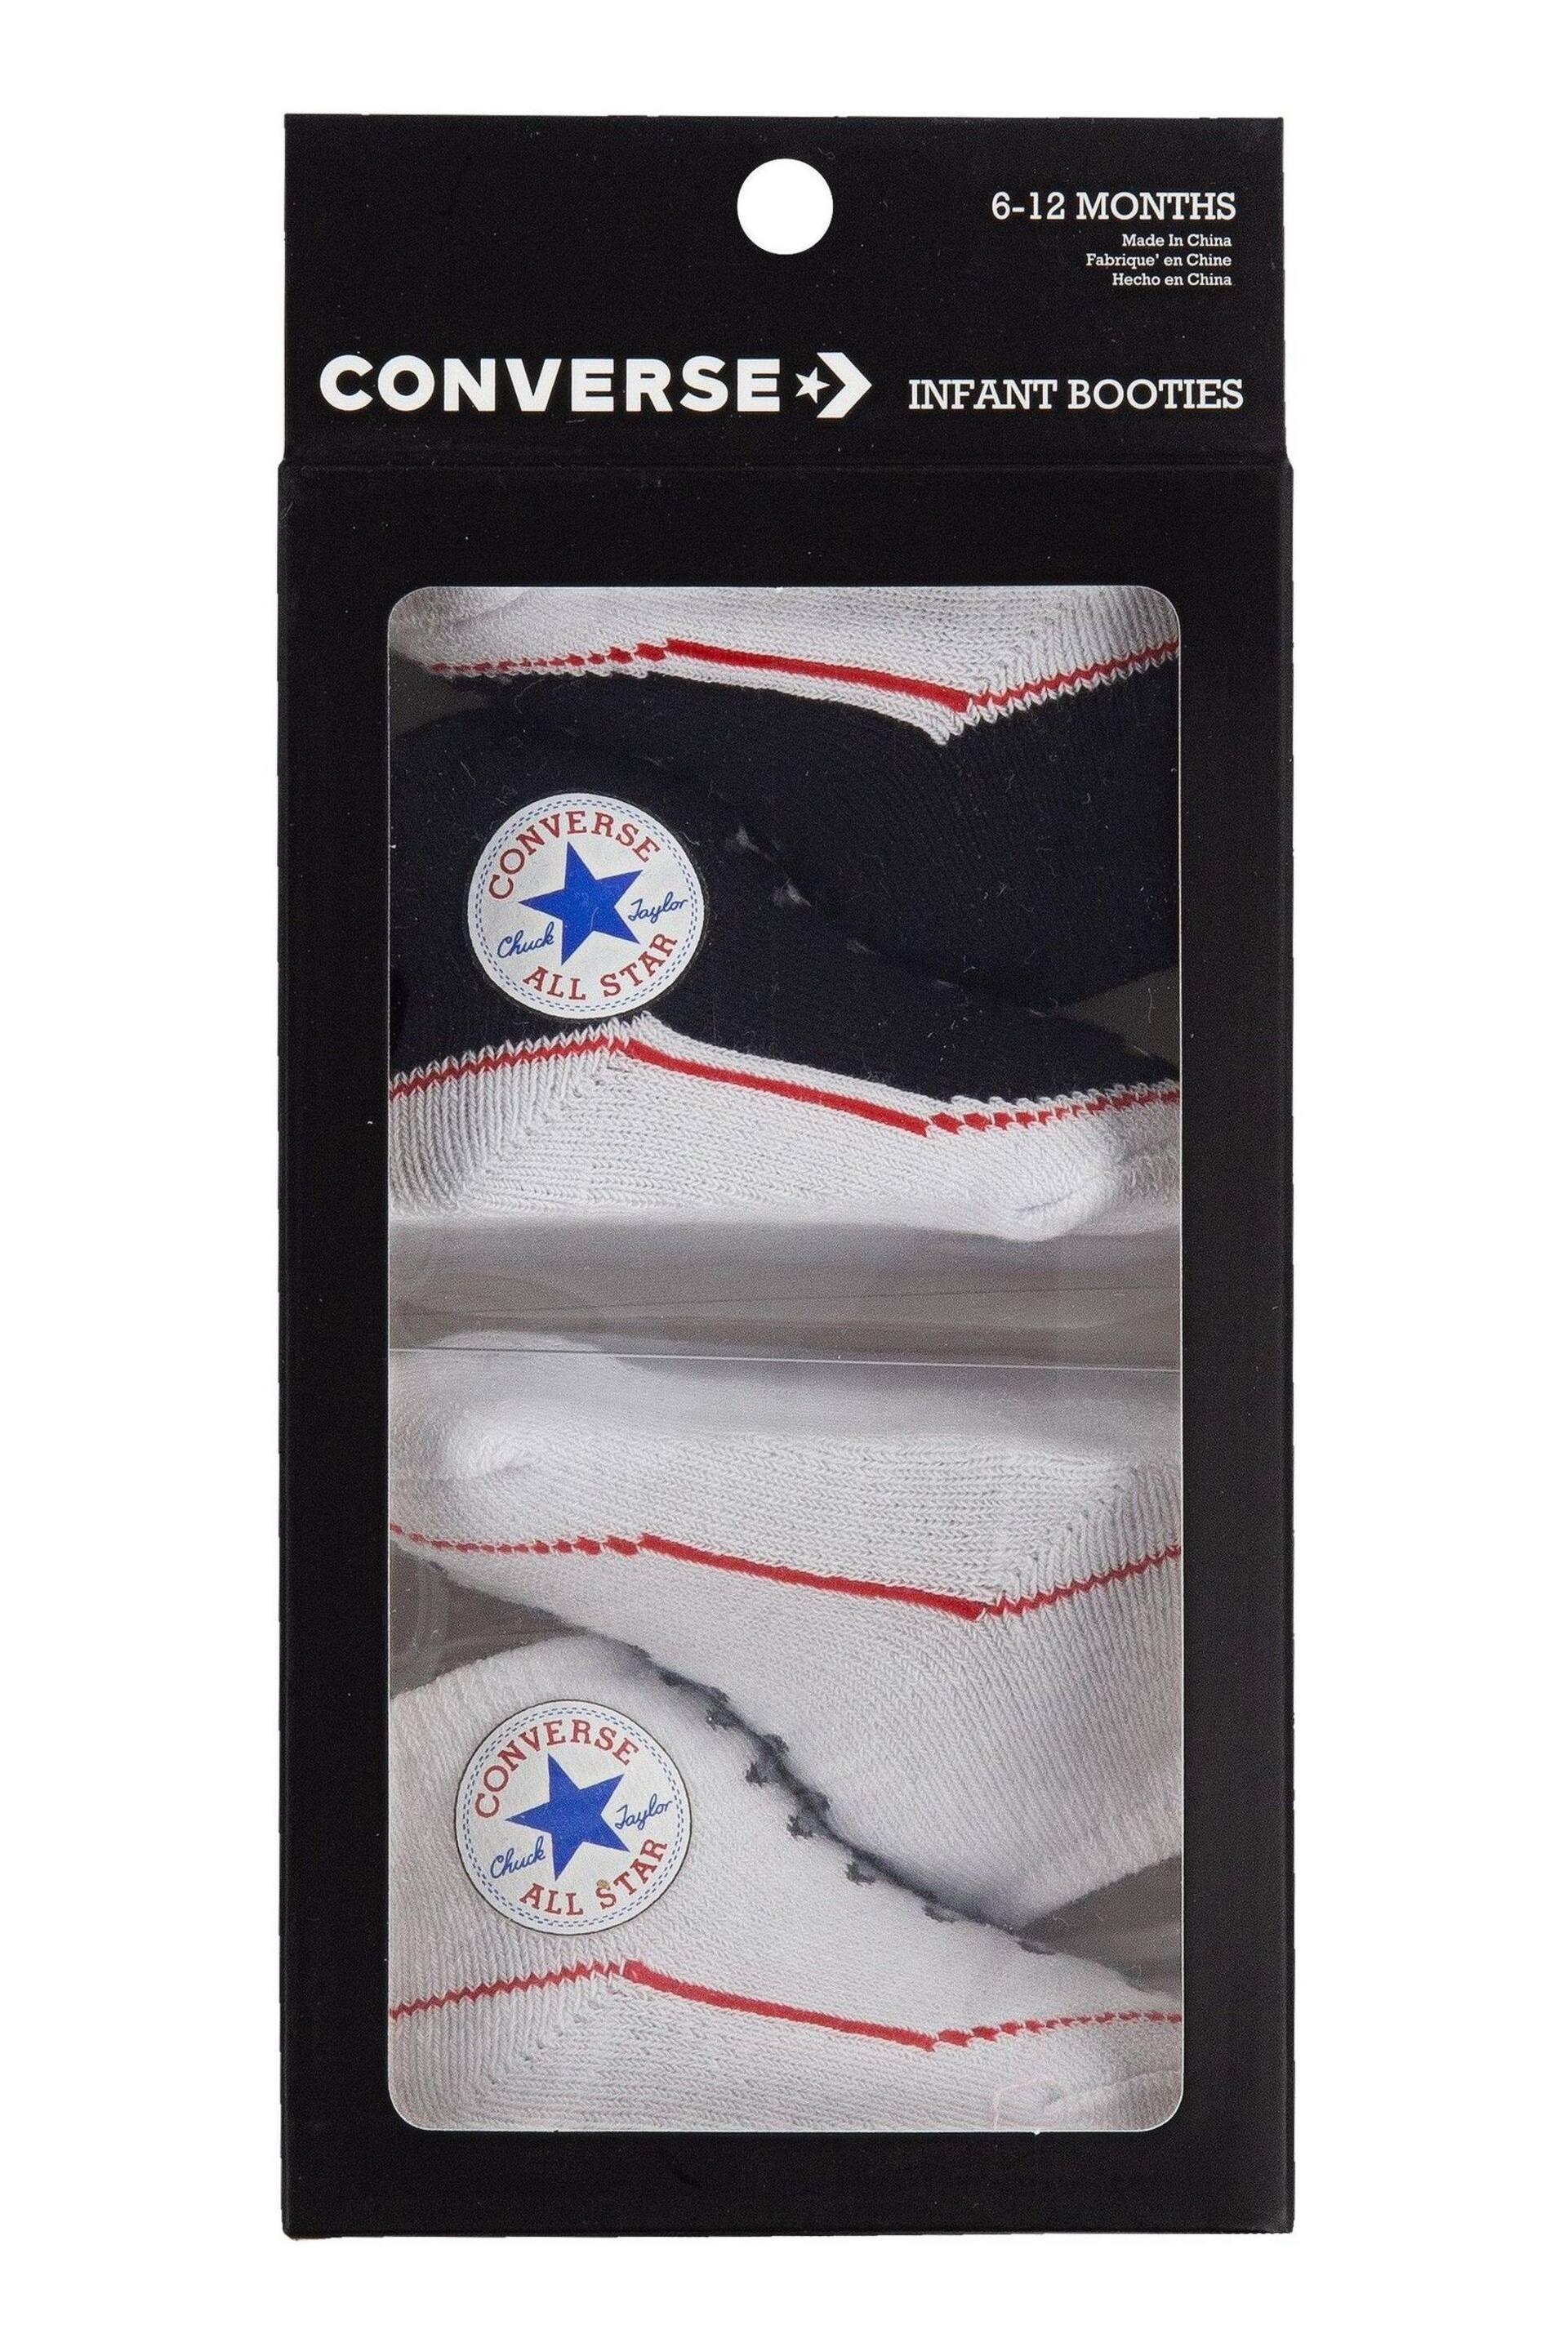 Converse Black Chuck Booties 2 Pack - Image 3 of 3